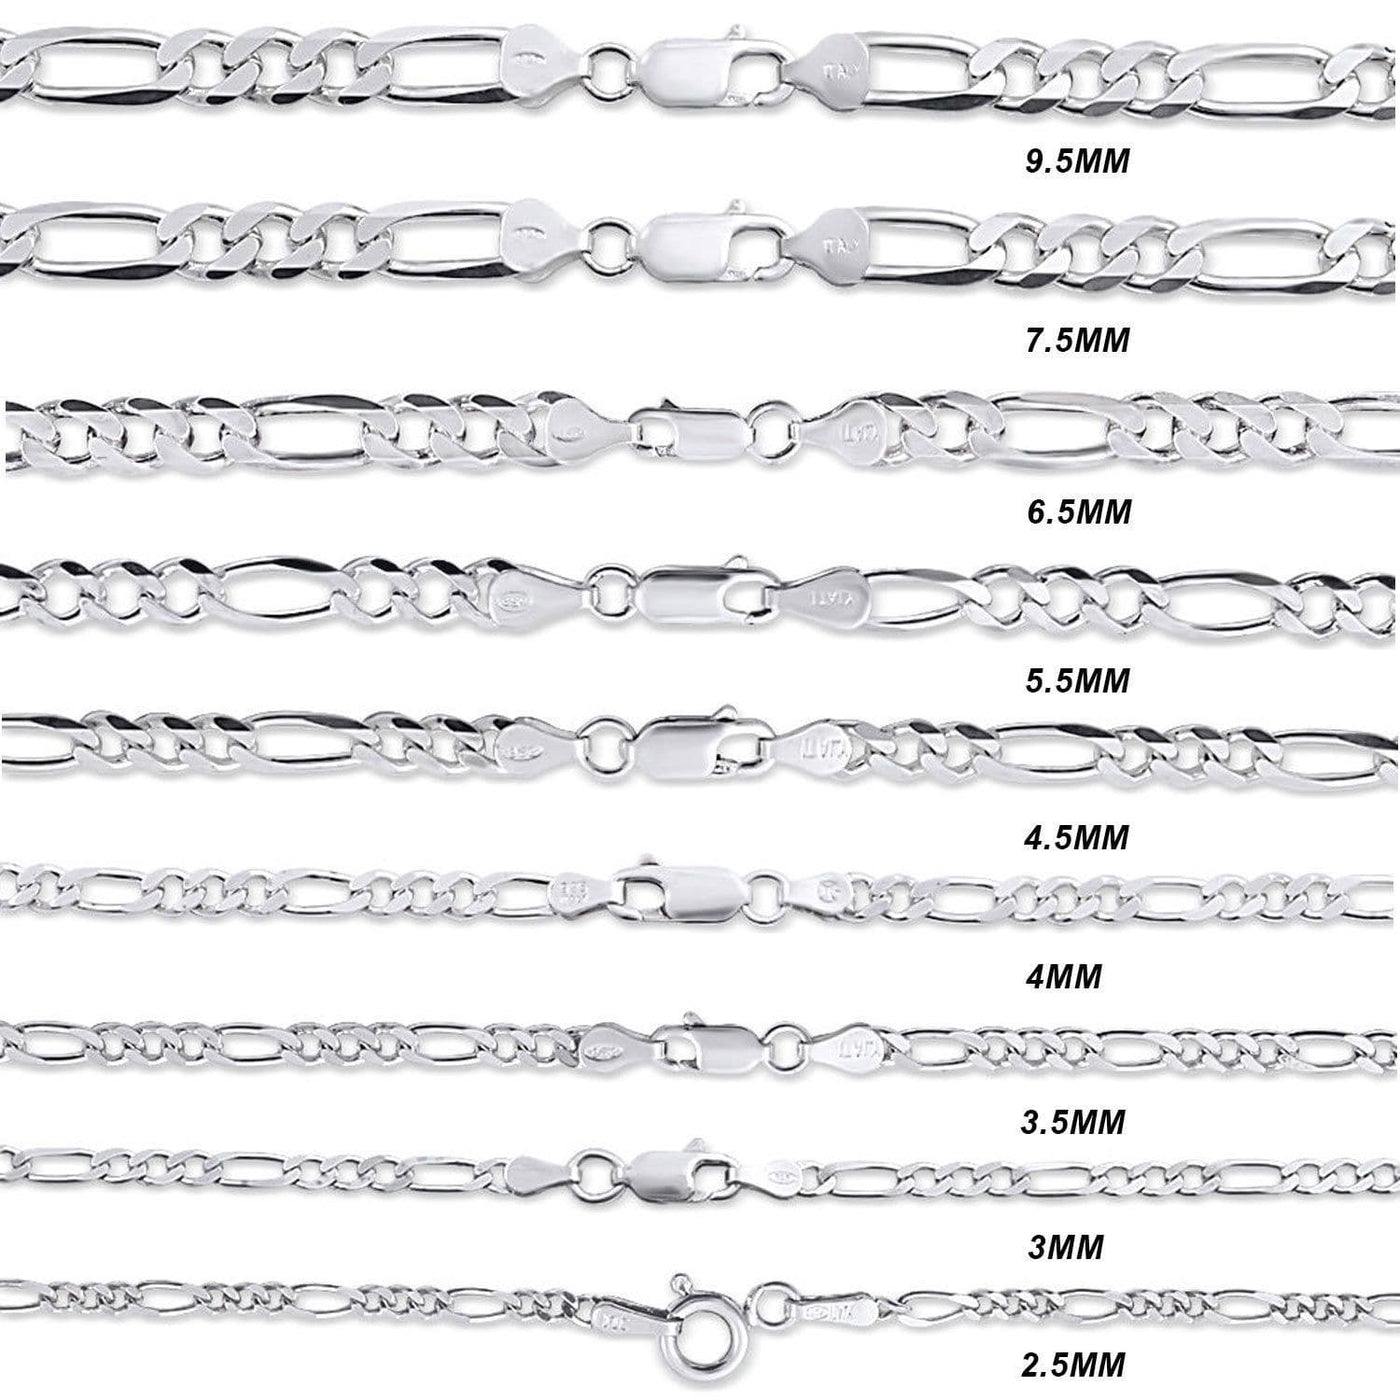 6 Smart Tips to Choose a Sterling Silver Chain For Your Pendant